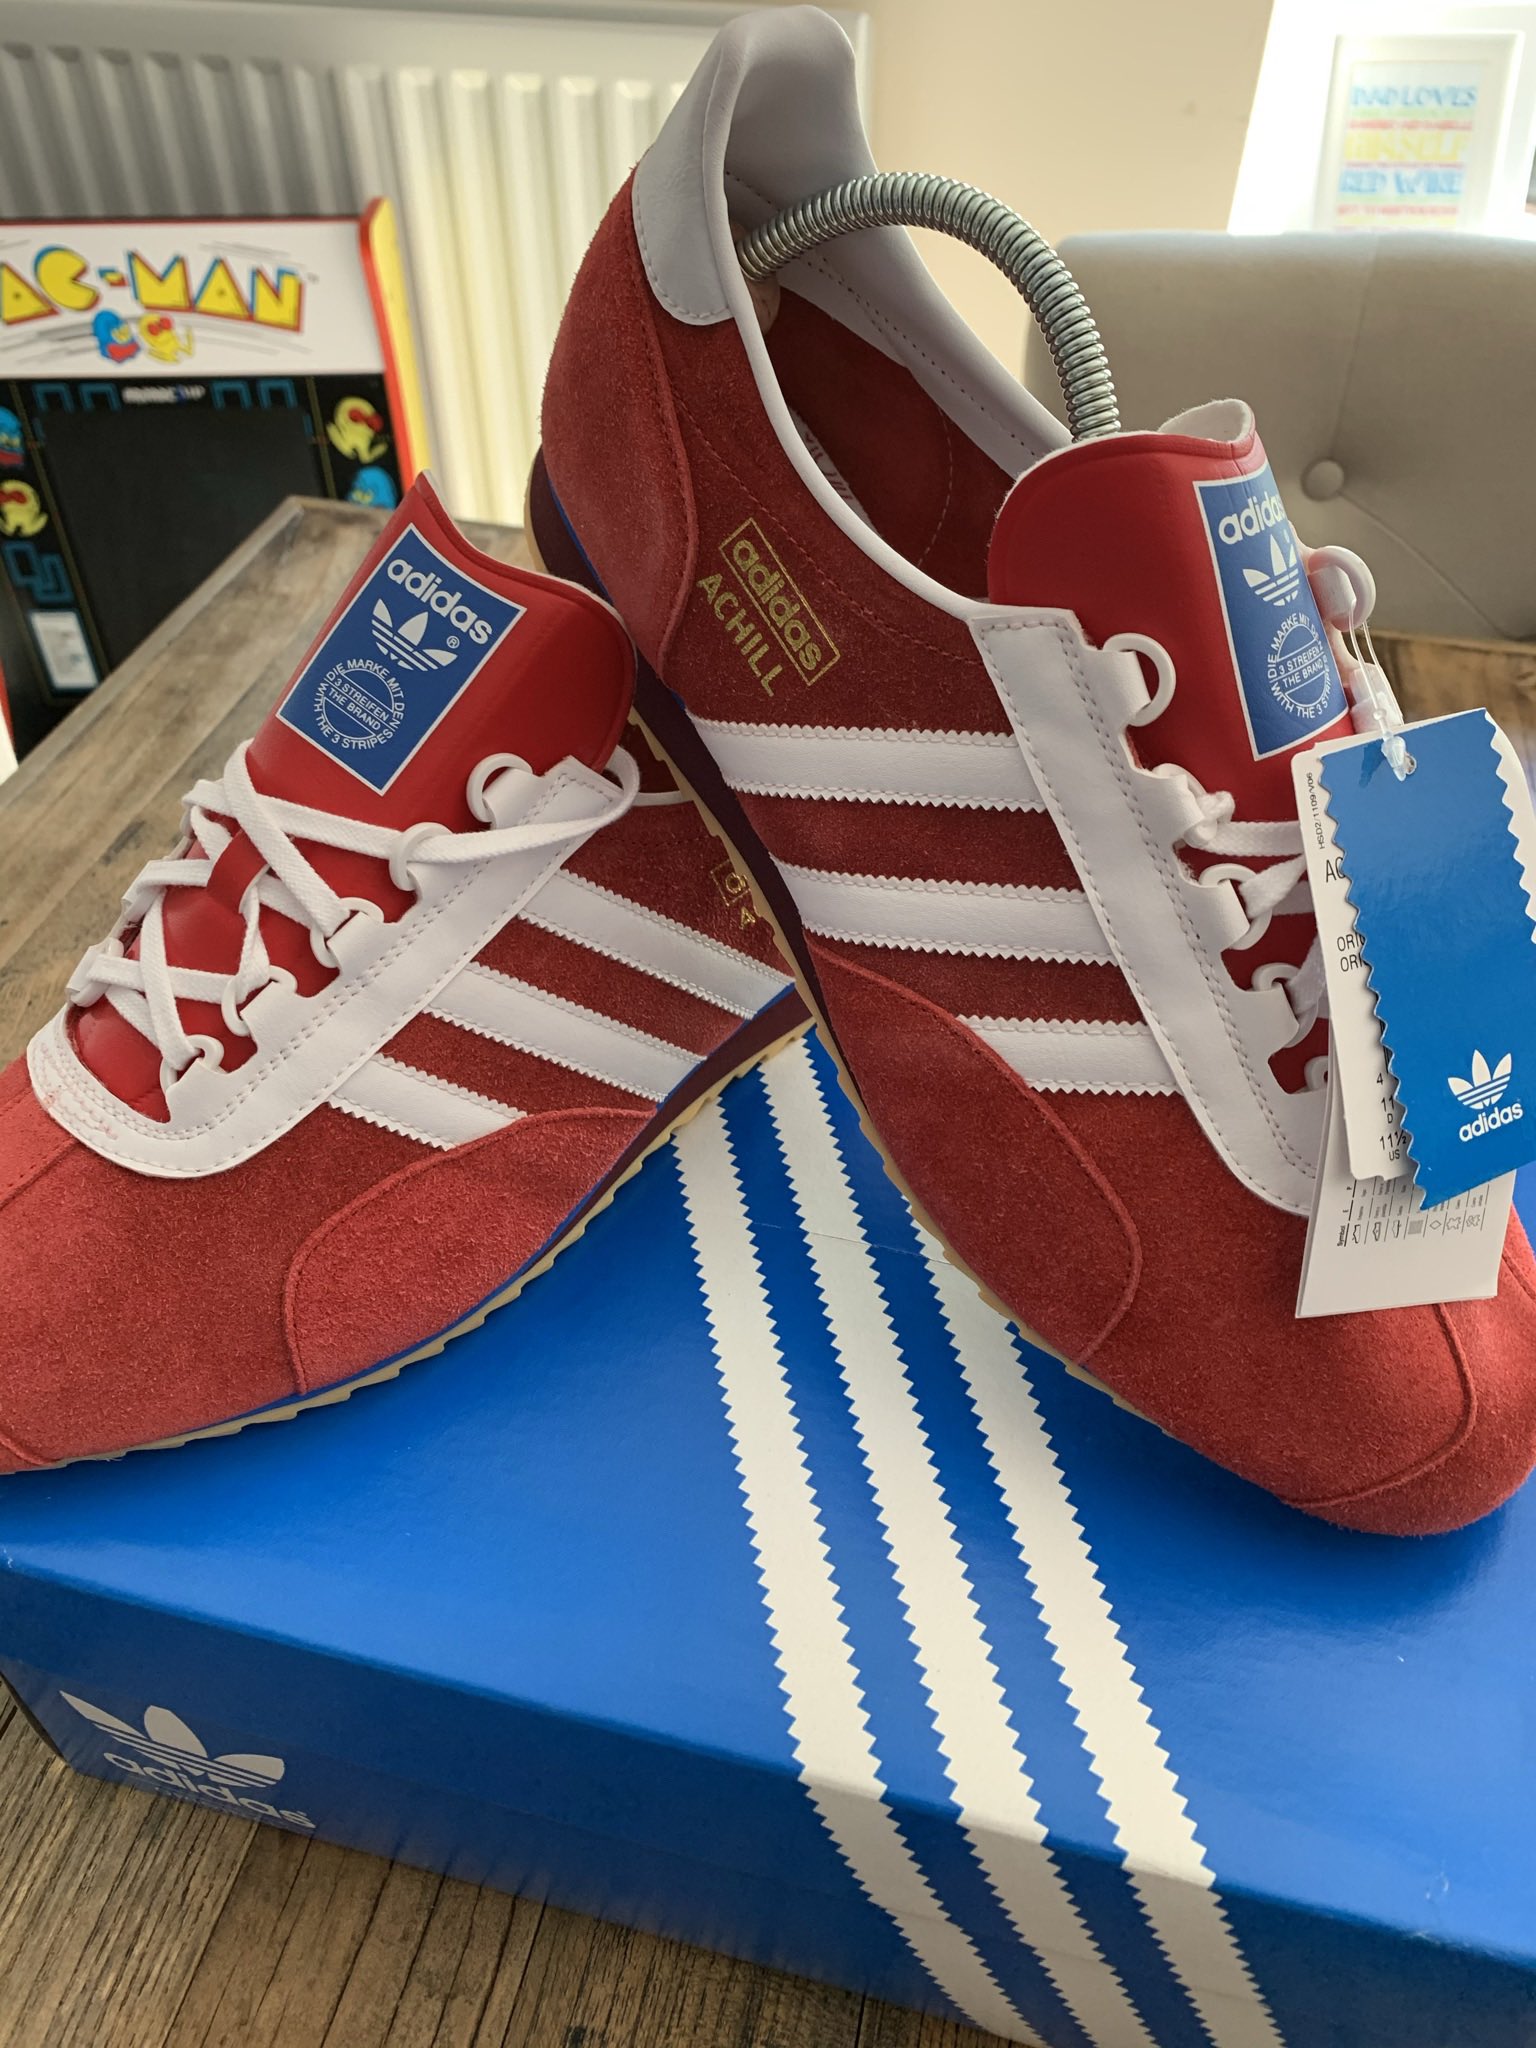 Gary Dale on Twitter: #Adifamily #adidasoriginals #shareyourstripes @MindBodySoleUK Weekend fun! Post a of favourite trabbs on here, let's see a great collection on here by Sunday! @3StripesAdam @hirdy1888 @CraigE1903 @